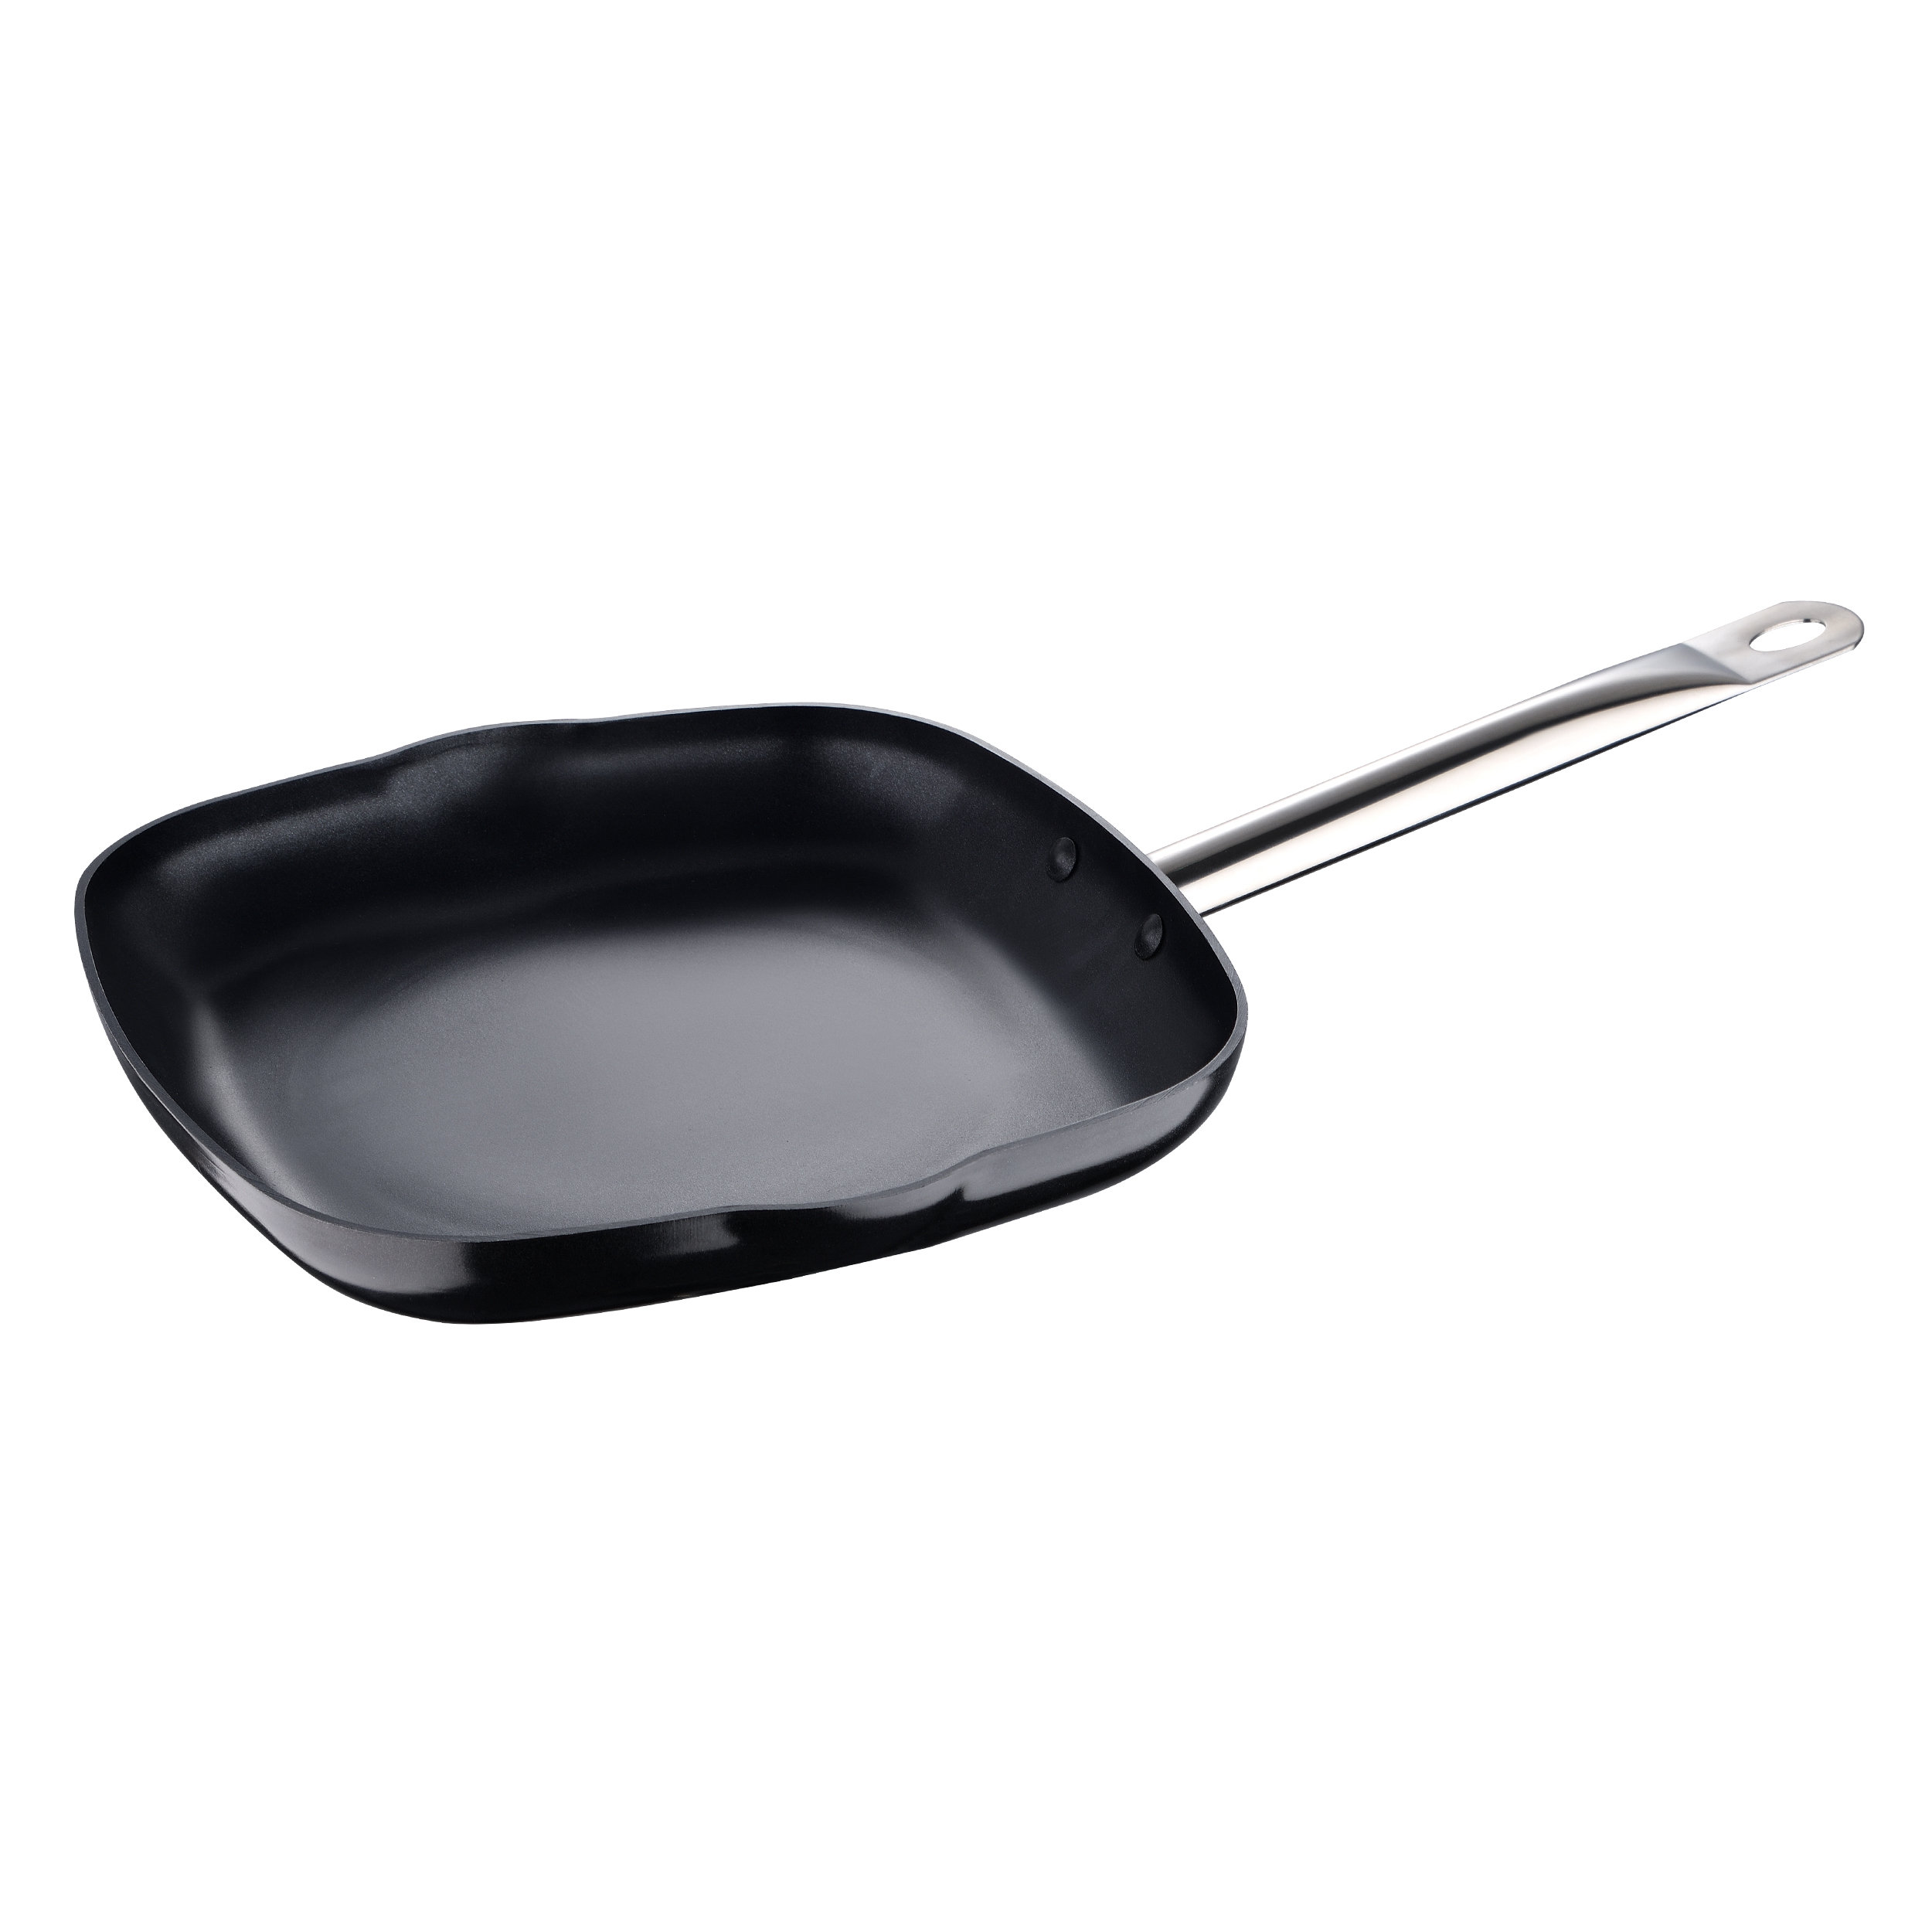  Cooks Standard Nonstick Square Griddle Pan 11 x 11-Inch, Hard  Anodized Cookware Griddle Pan, Black: Home & Kitchen